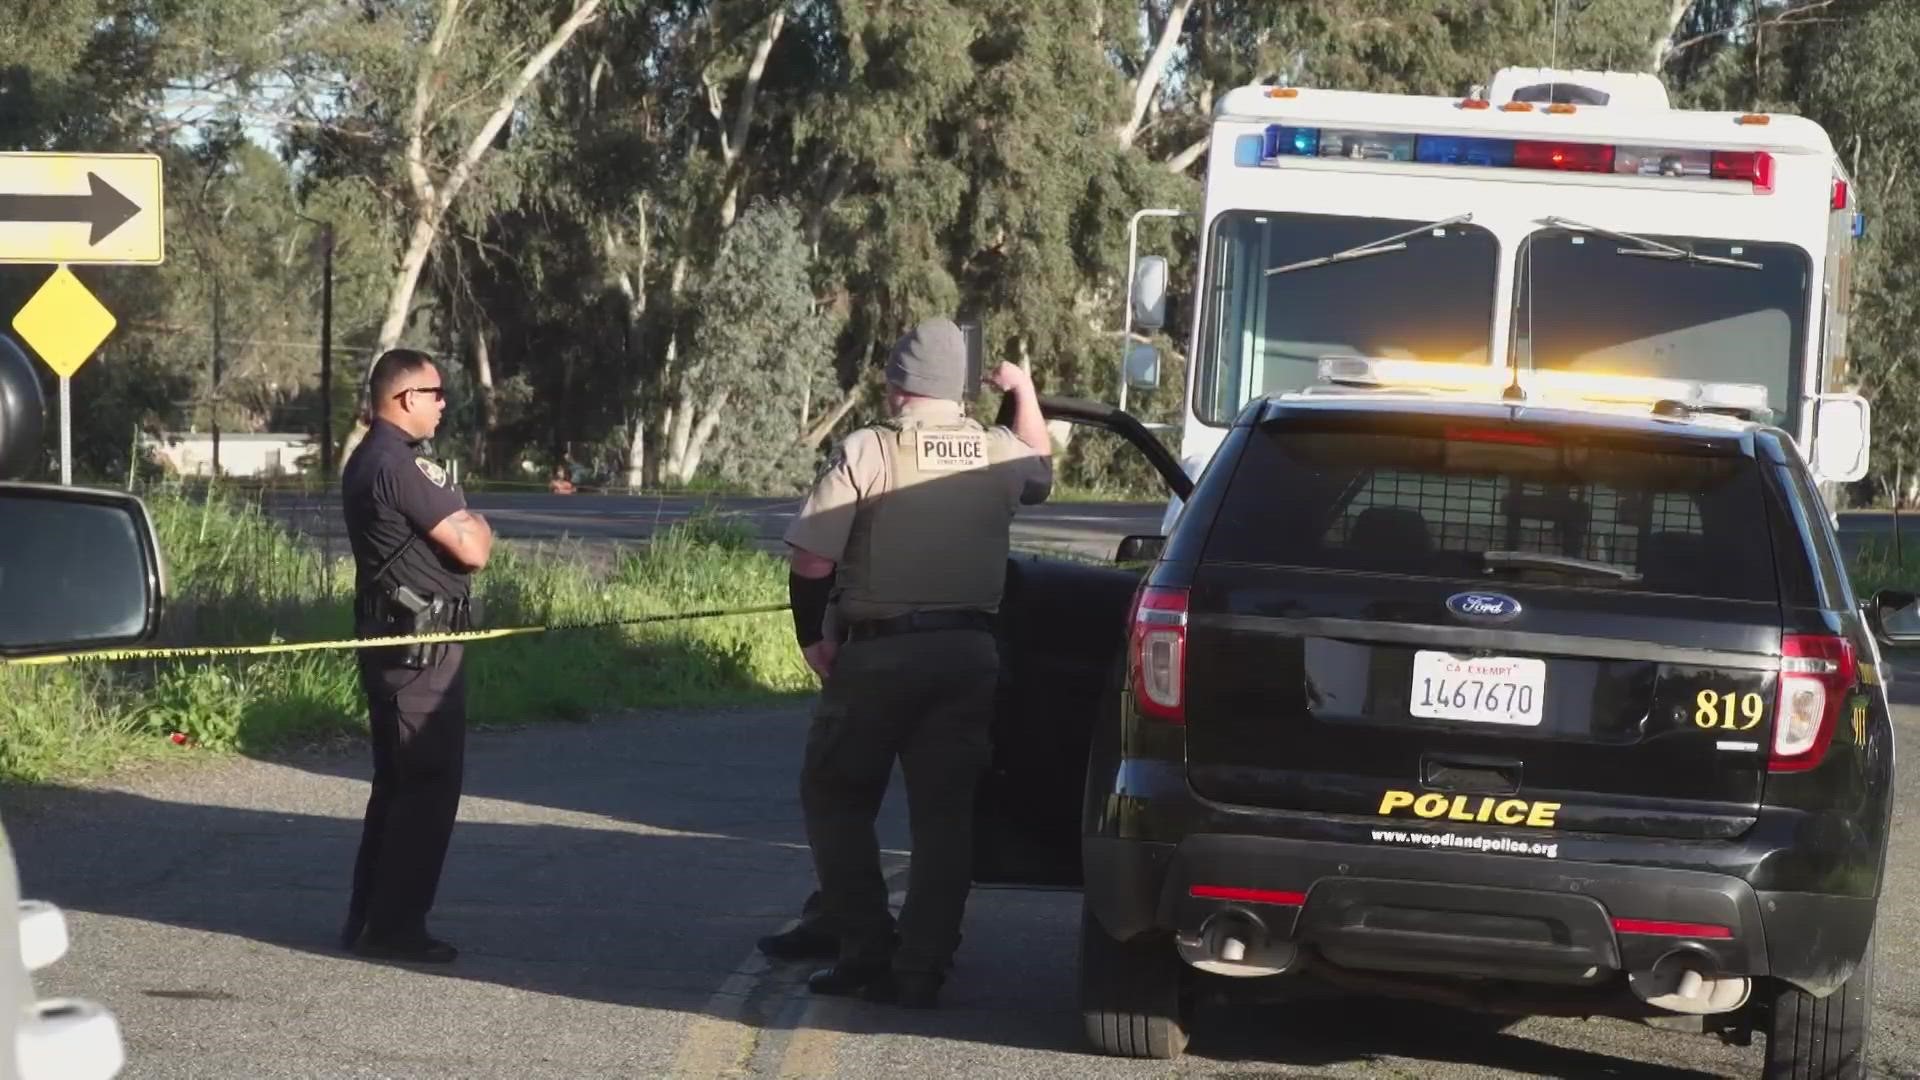 A person was shot and killed by the Yolo County SWAT team while they were serving an arrest warrant, according to the Yolo County Sheriff's Office.